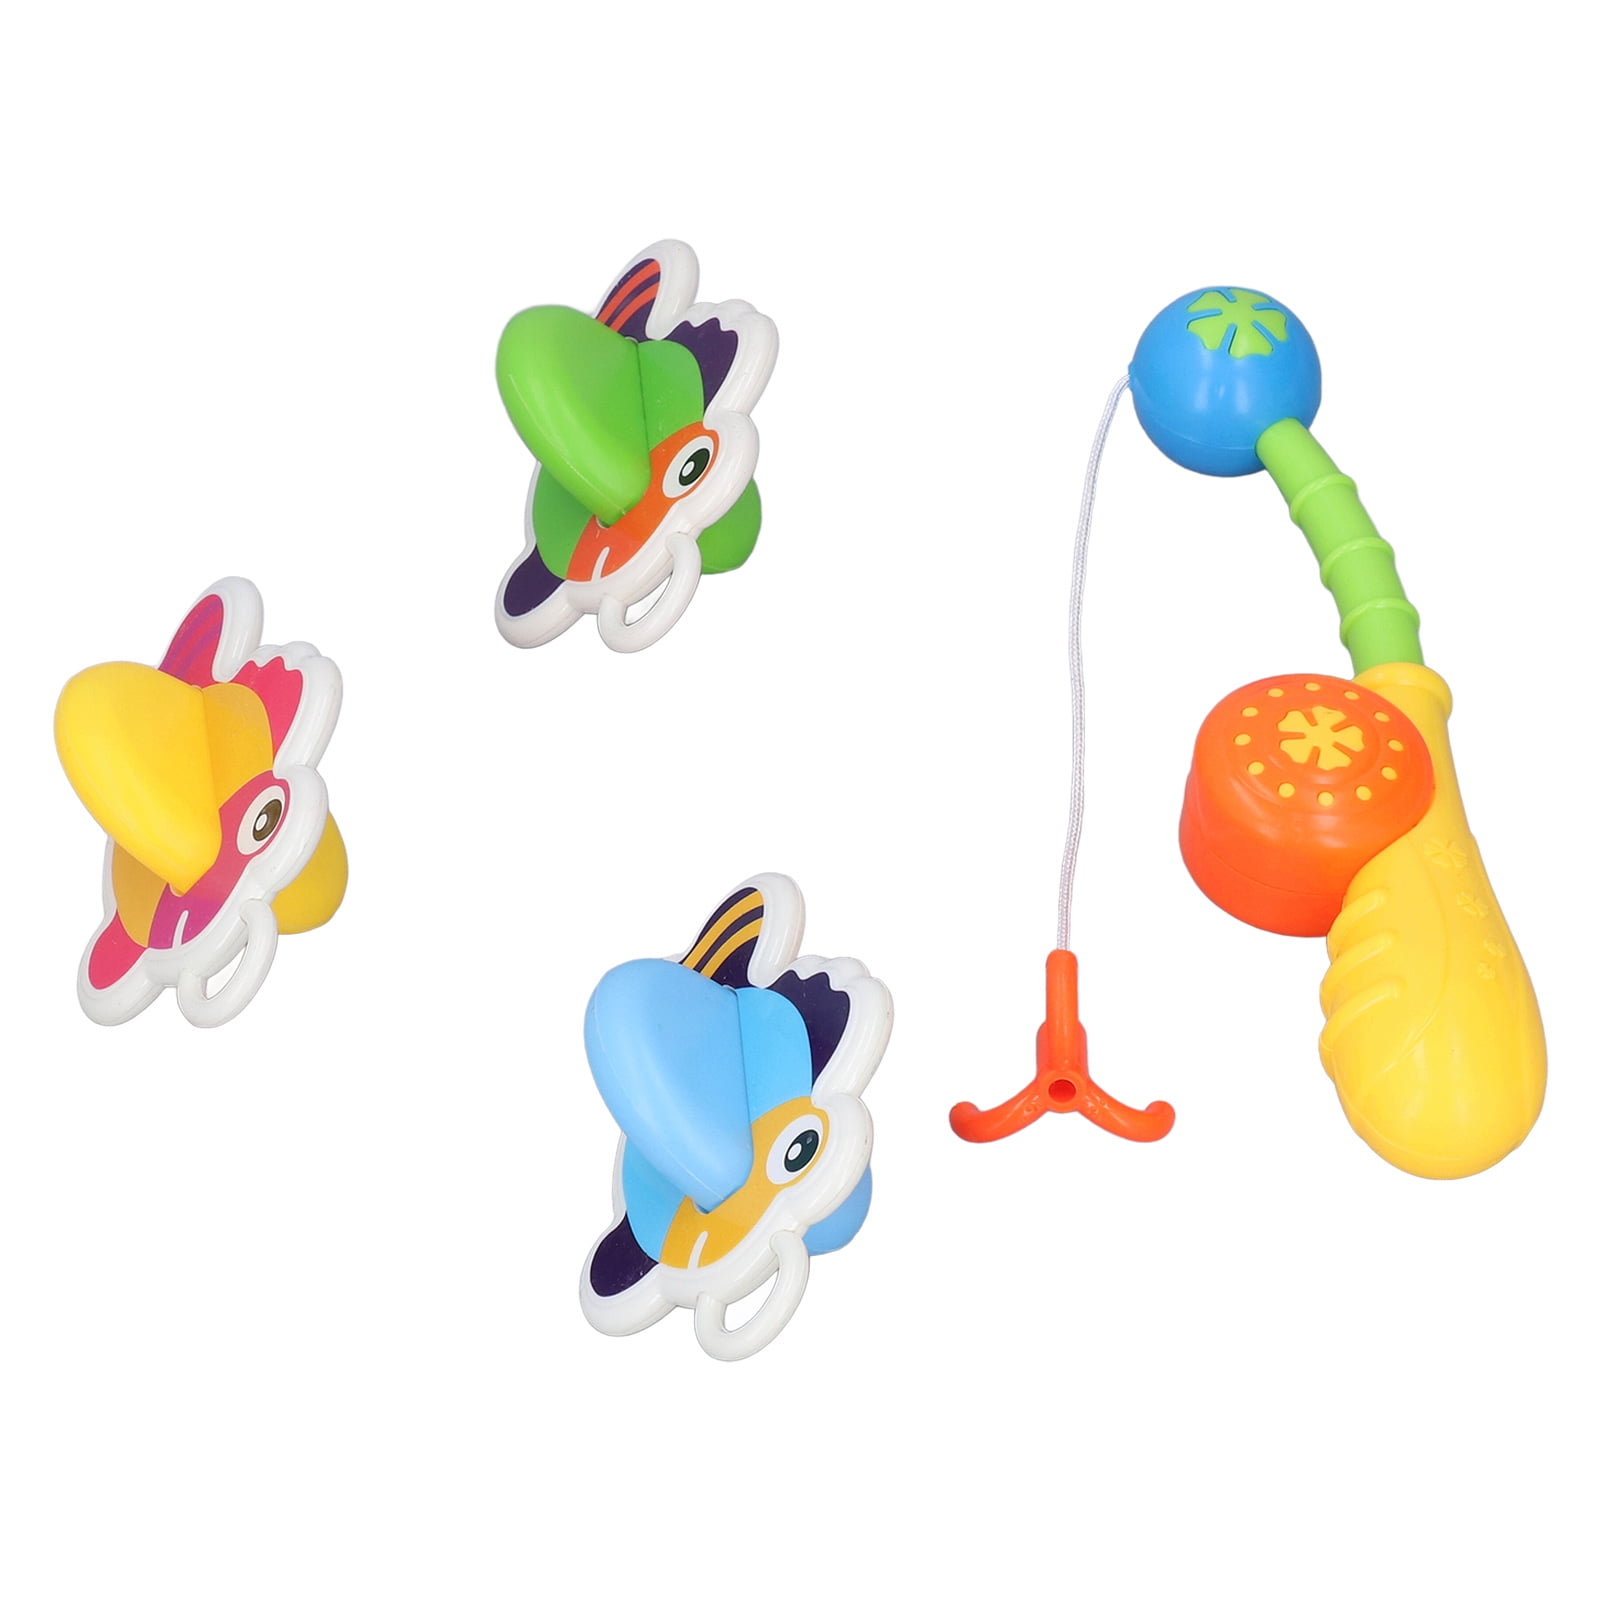 Bathtub Fishing Toy, Portable Colorful Bath Fishing Toy 4pcs ABS for Baby Children for Home Bathroom